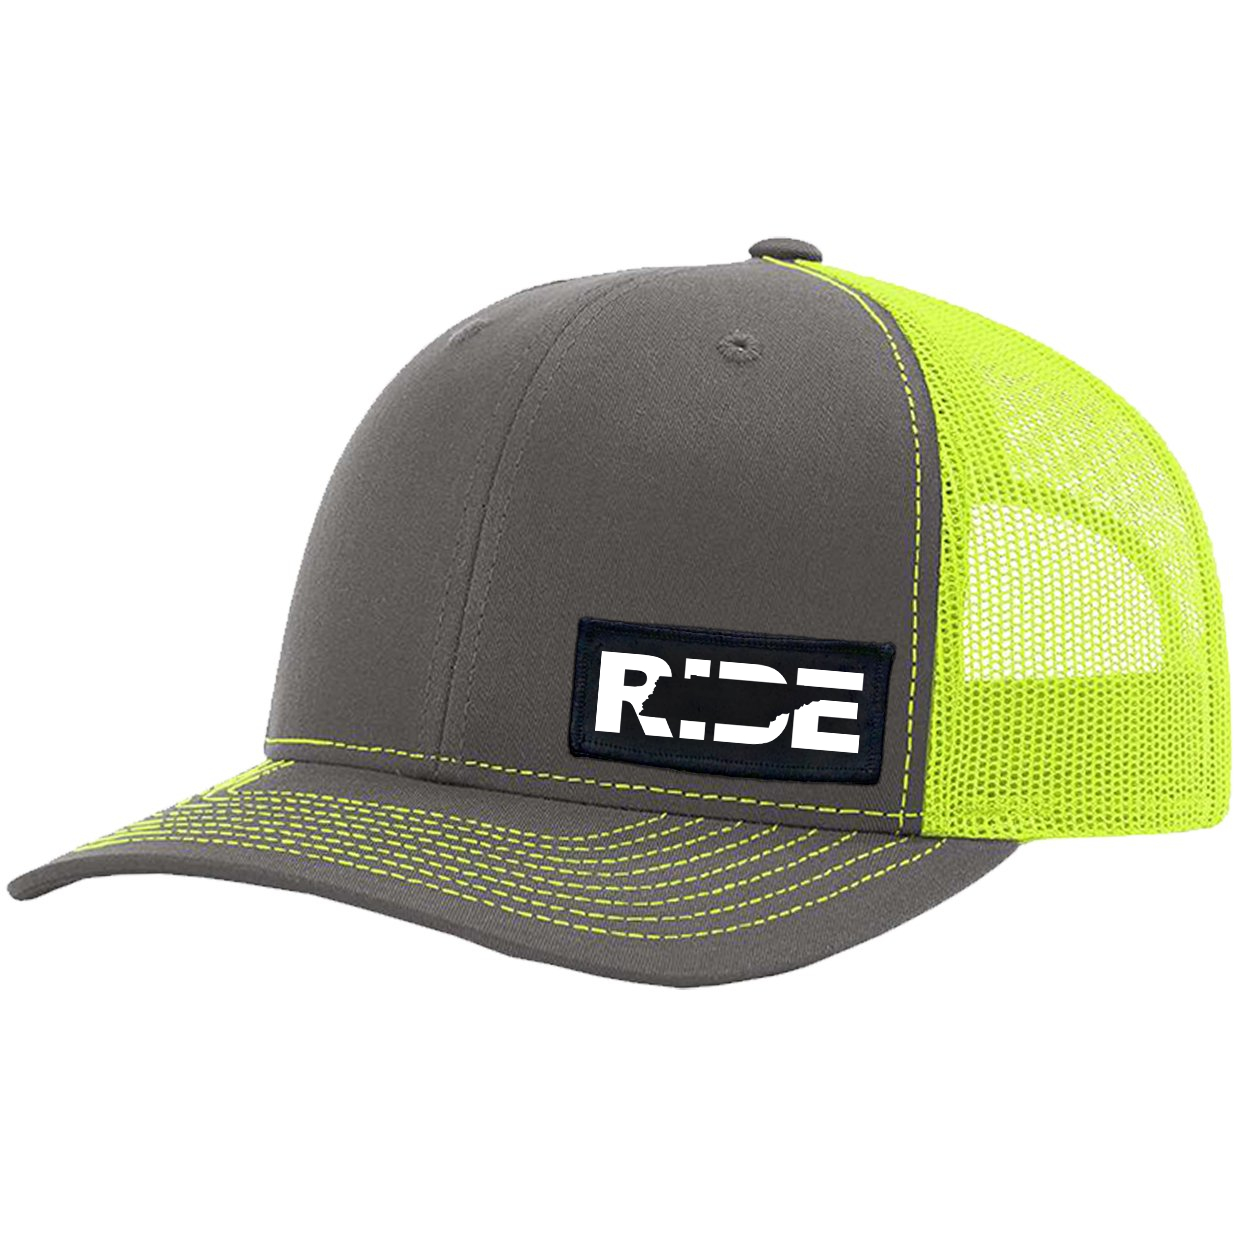 Ride Tennessee Night Out Woven Patch Snapback Trucker Hat Charcoal/Neon Yellow (White Logo)